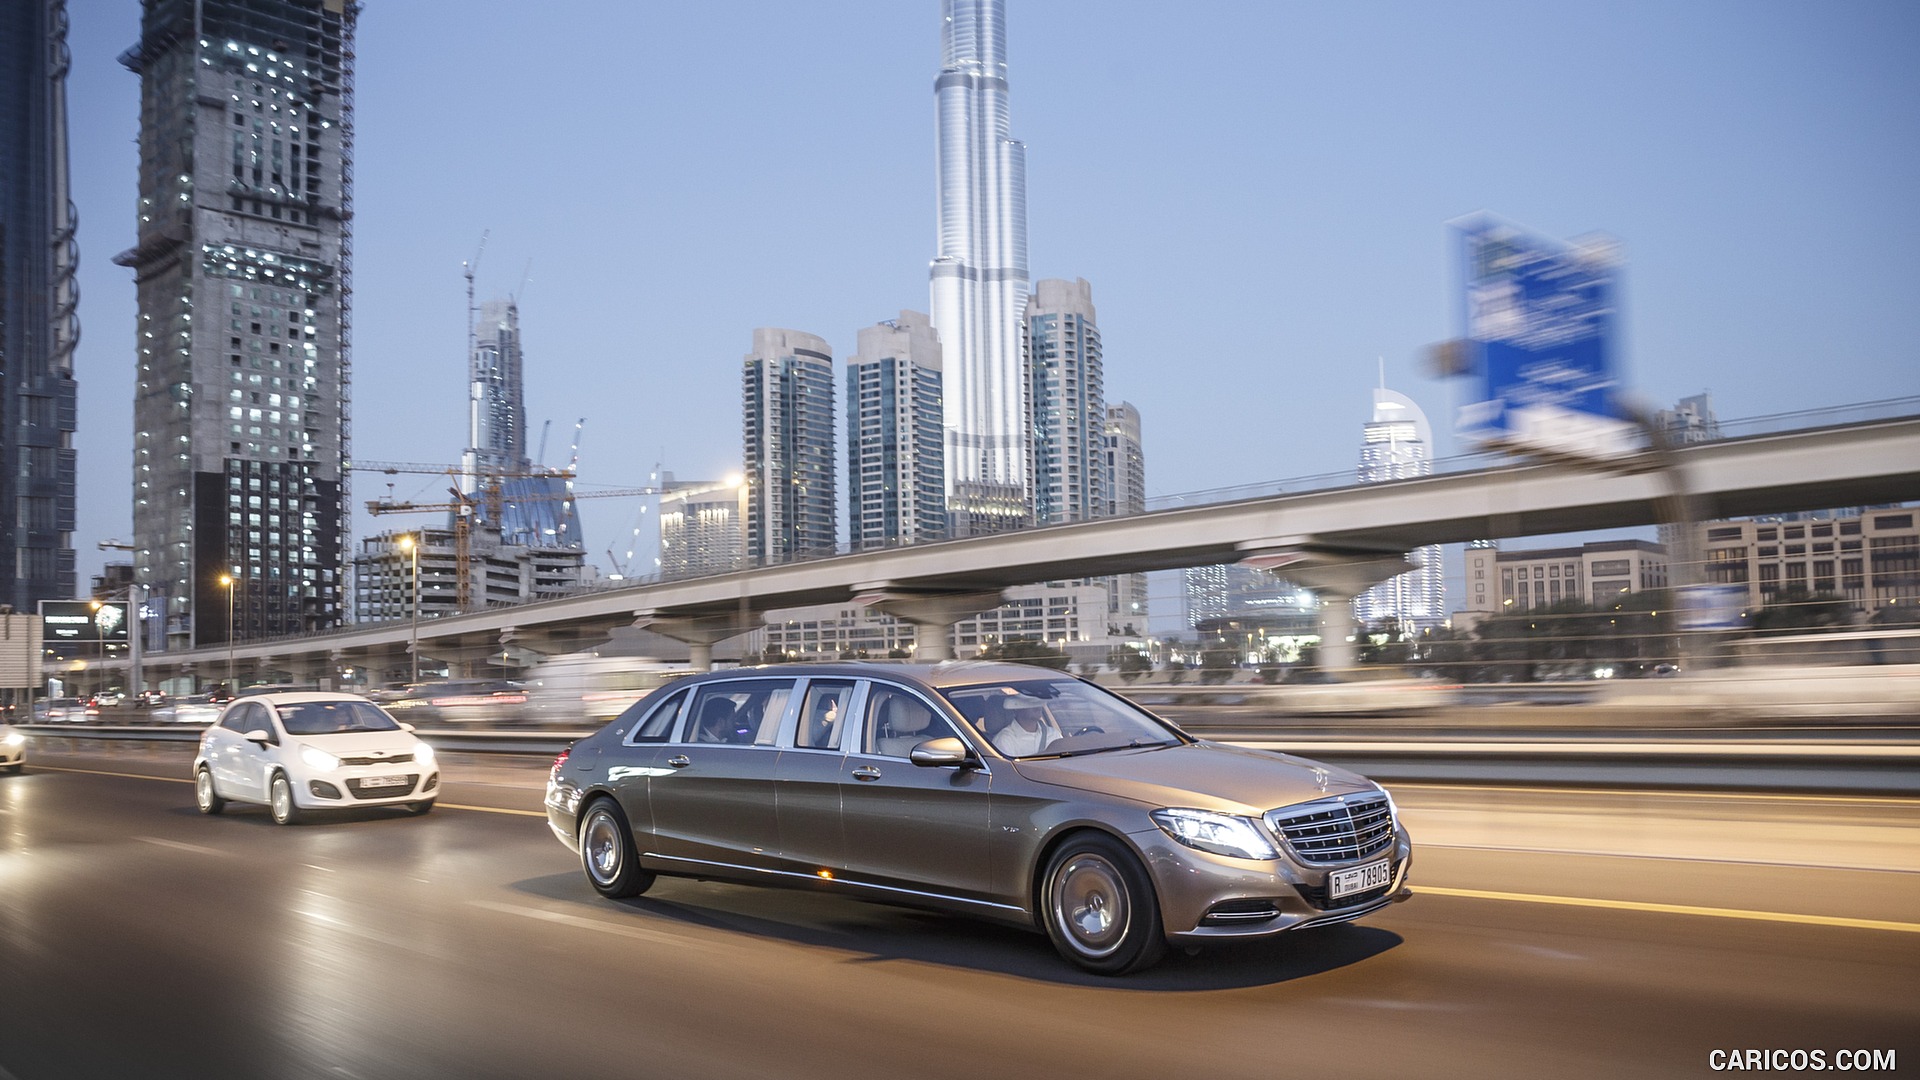 2016 Mercedes-Maybach S600 Pullman in Dubai - Front, #28 of 31